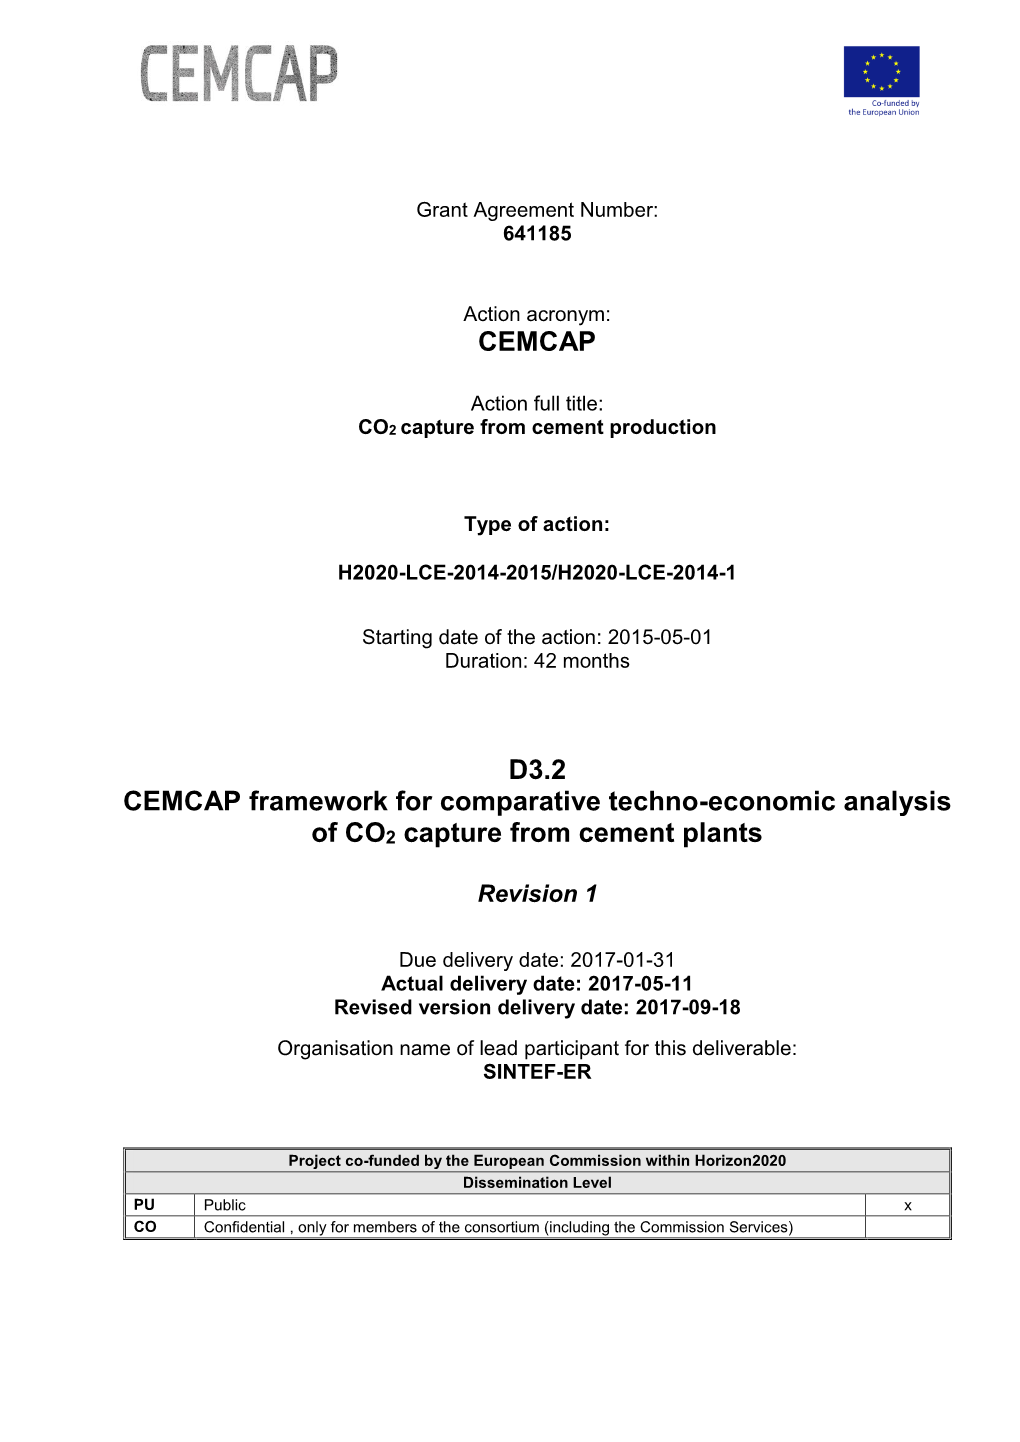 CEMCAP Framework for Comparative Techno-Economic Analysis of CO2 Capture from Cement Plants